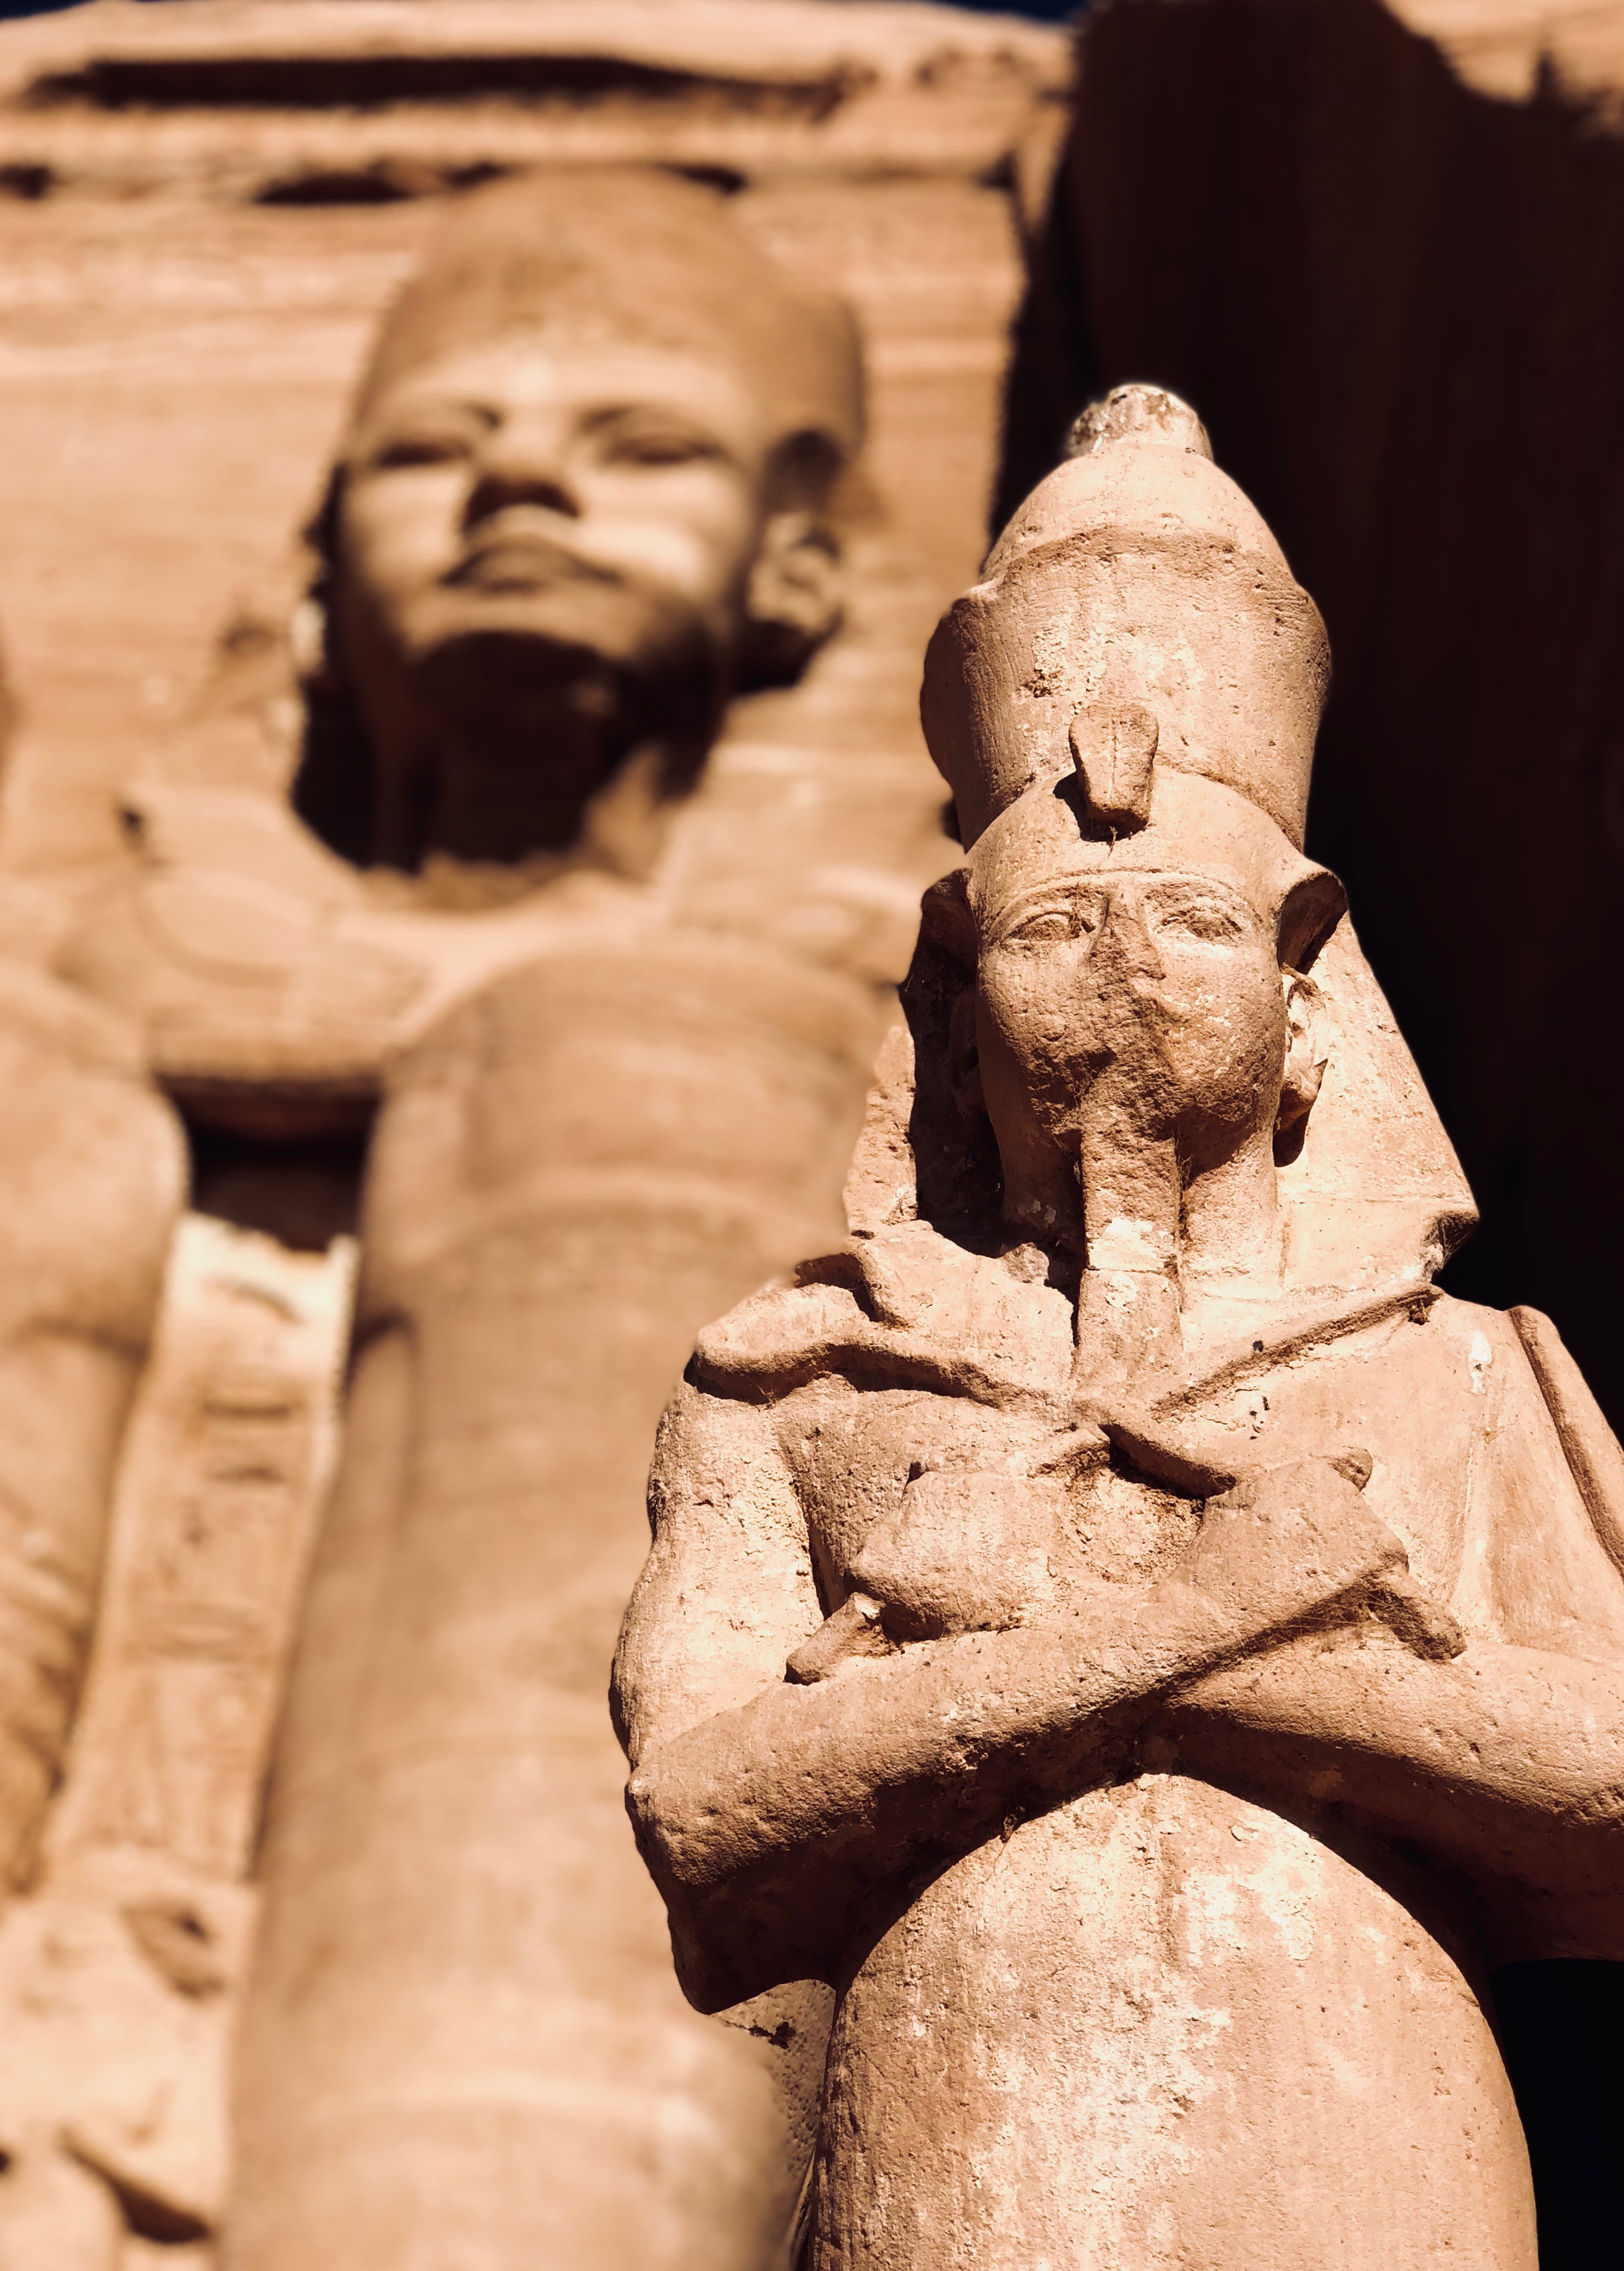 Egypt was home to countless statues and images of the great kings and rulers. But ironically, their wonder and detail rather reflected the unmatched skill of the simple craftsmen who built them.